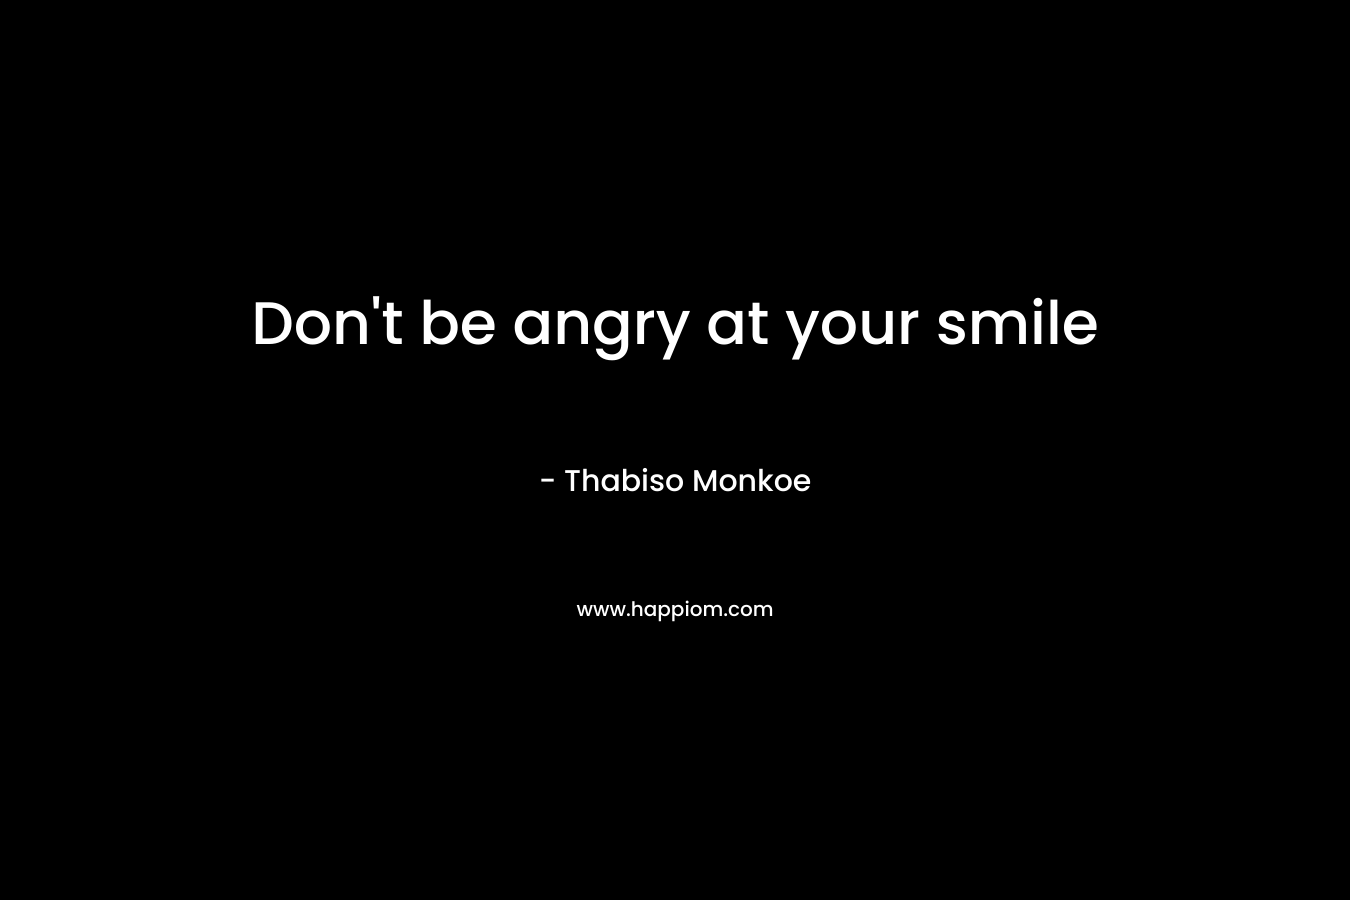 Don't be angry at your smile